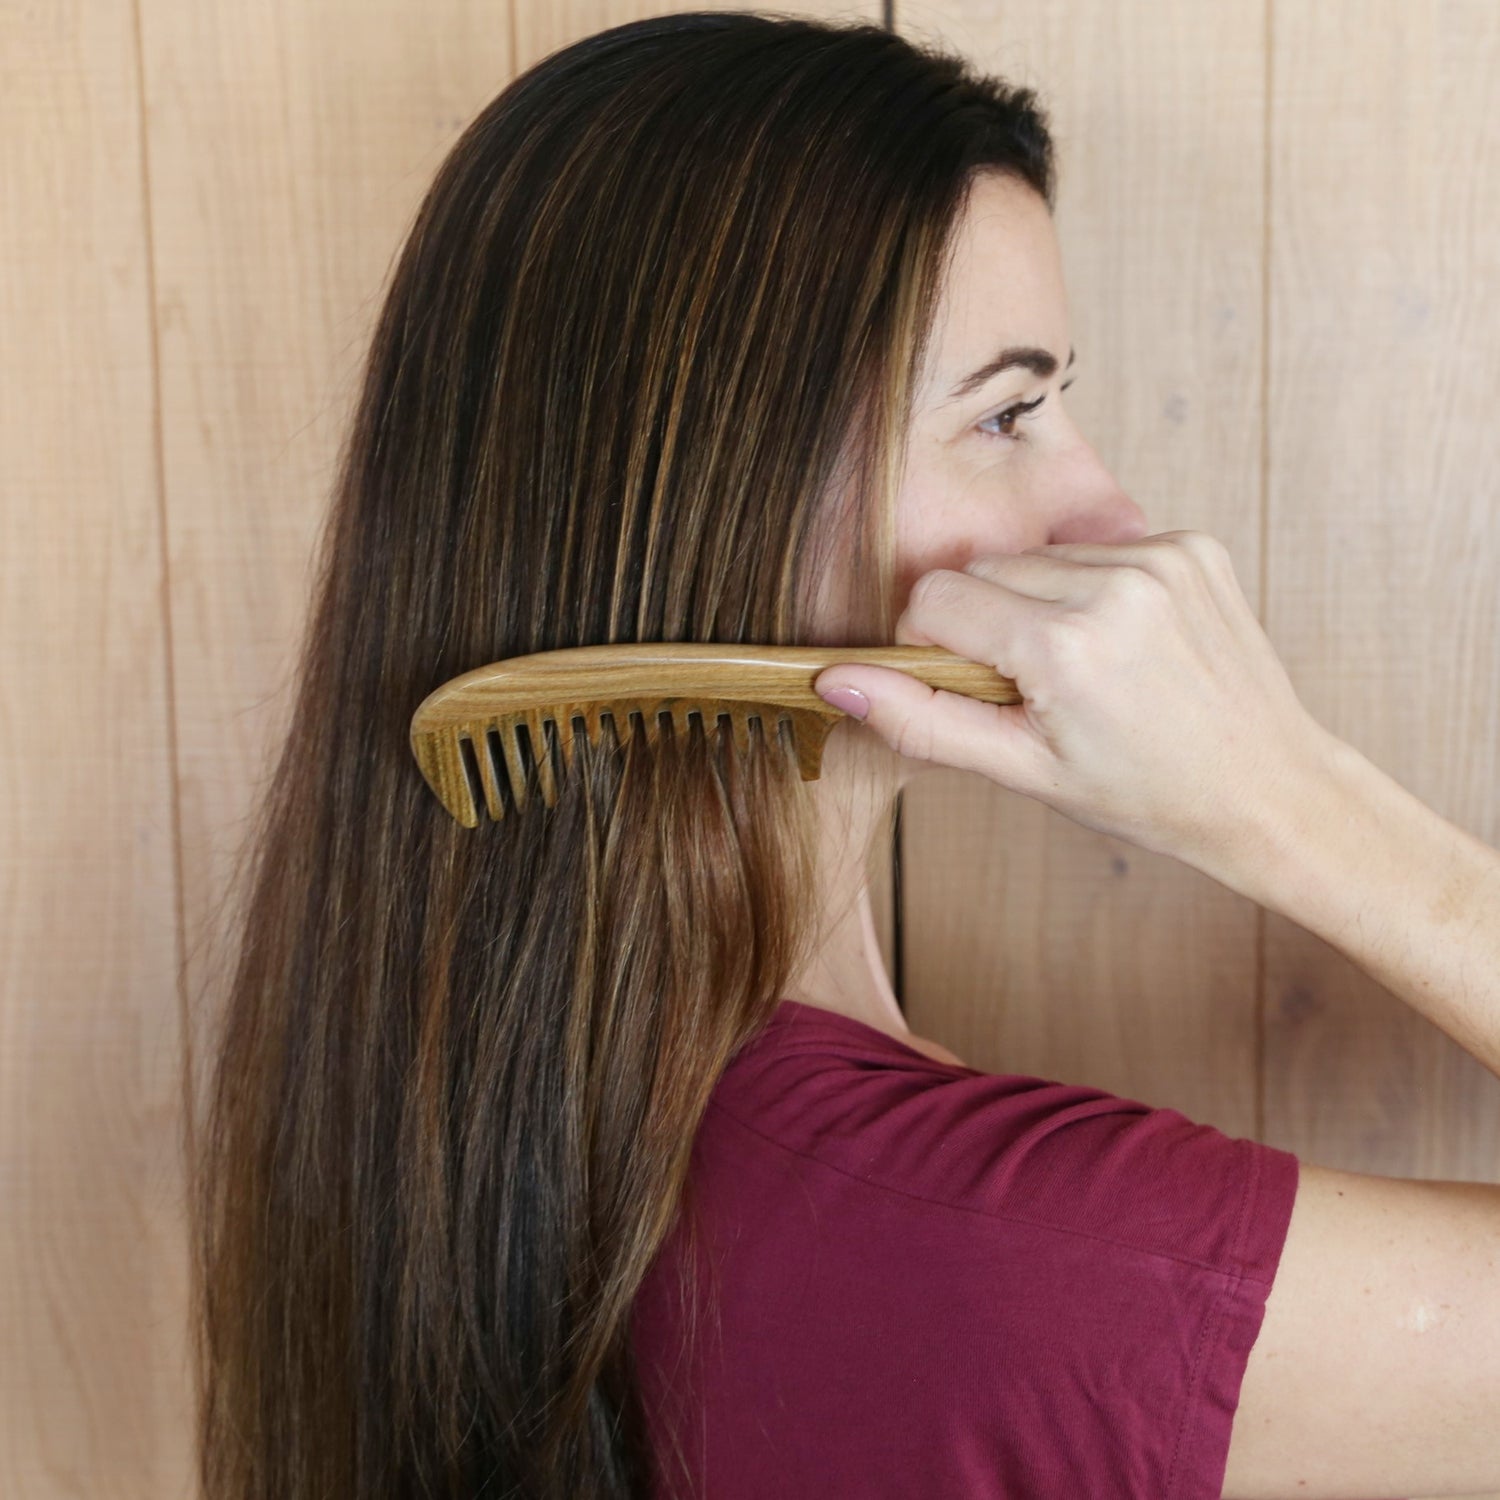 sandalwood comb handmade with a nice design anti static being used by a woman